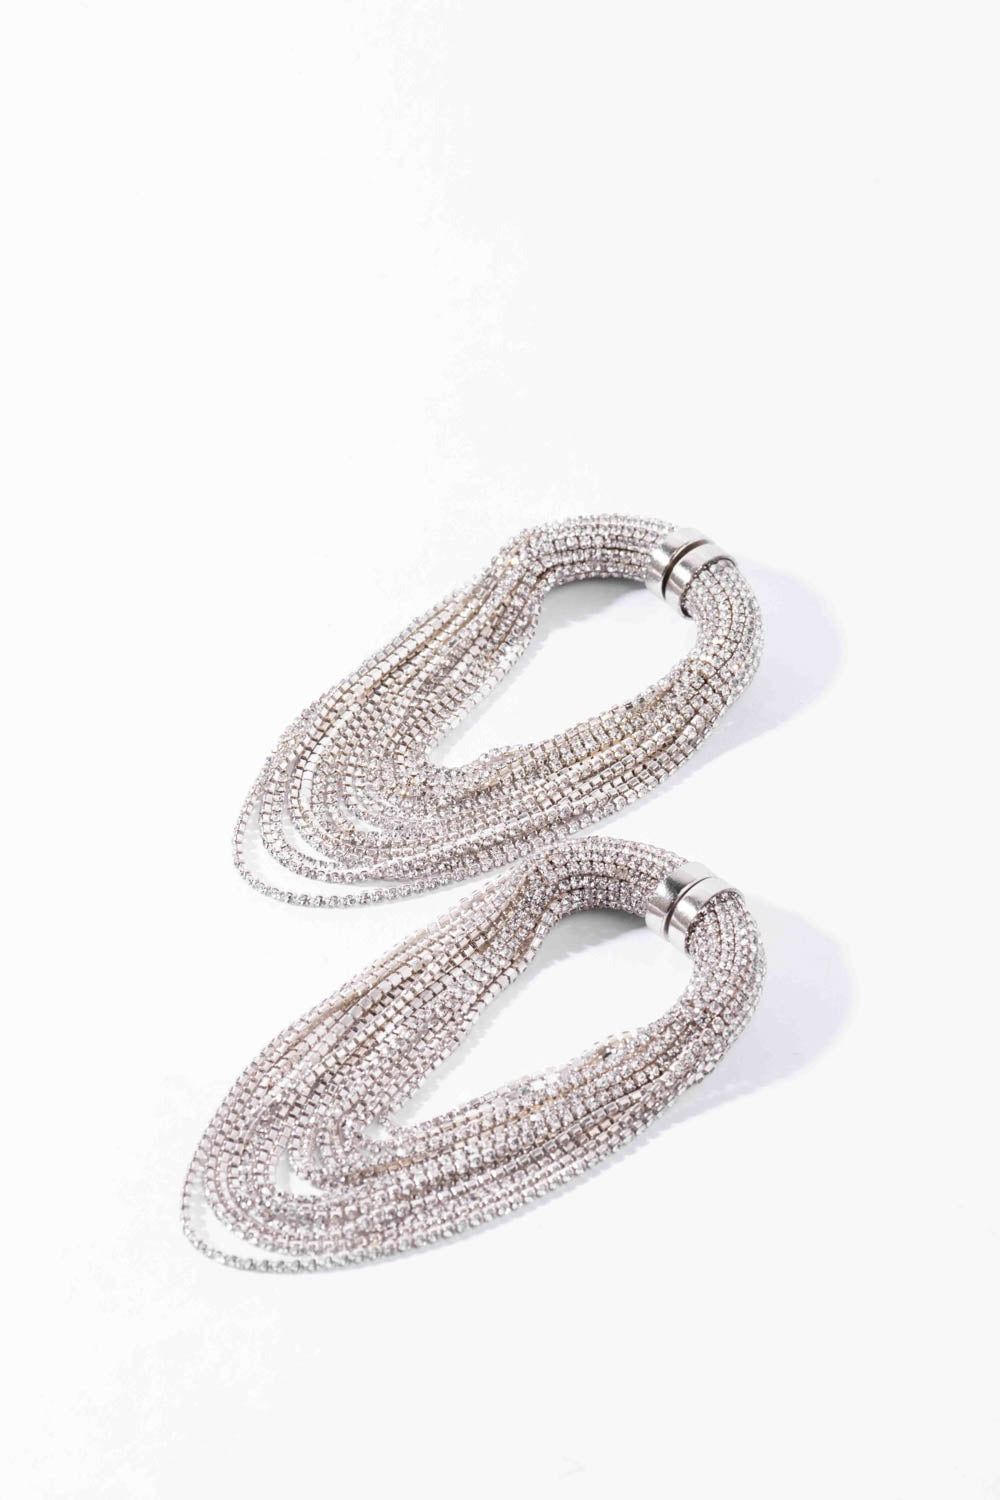 Amama,Infinity Fall Danglers In Sparkling White